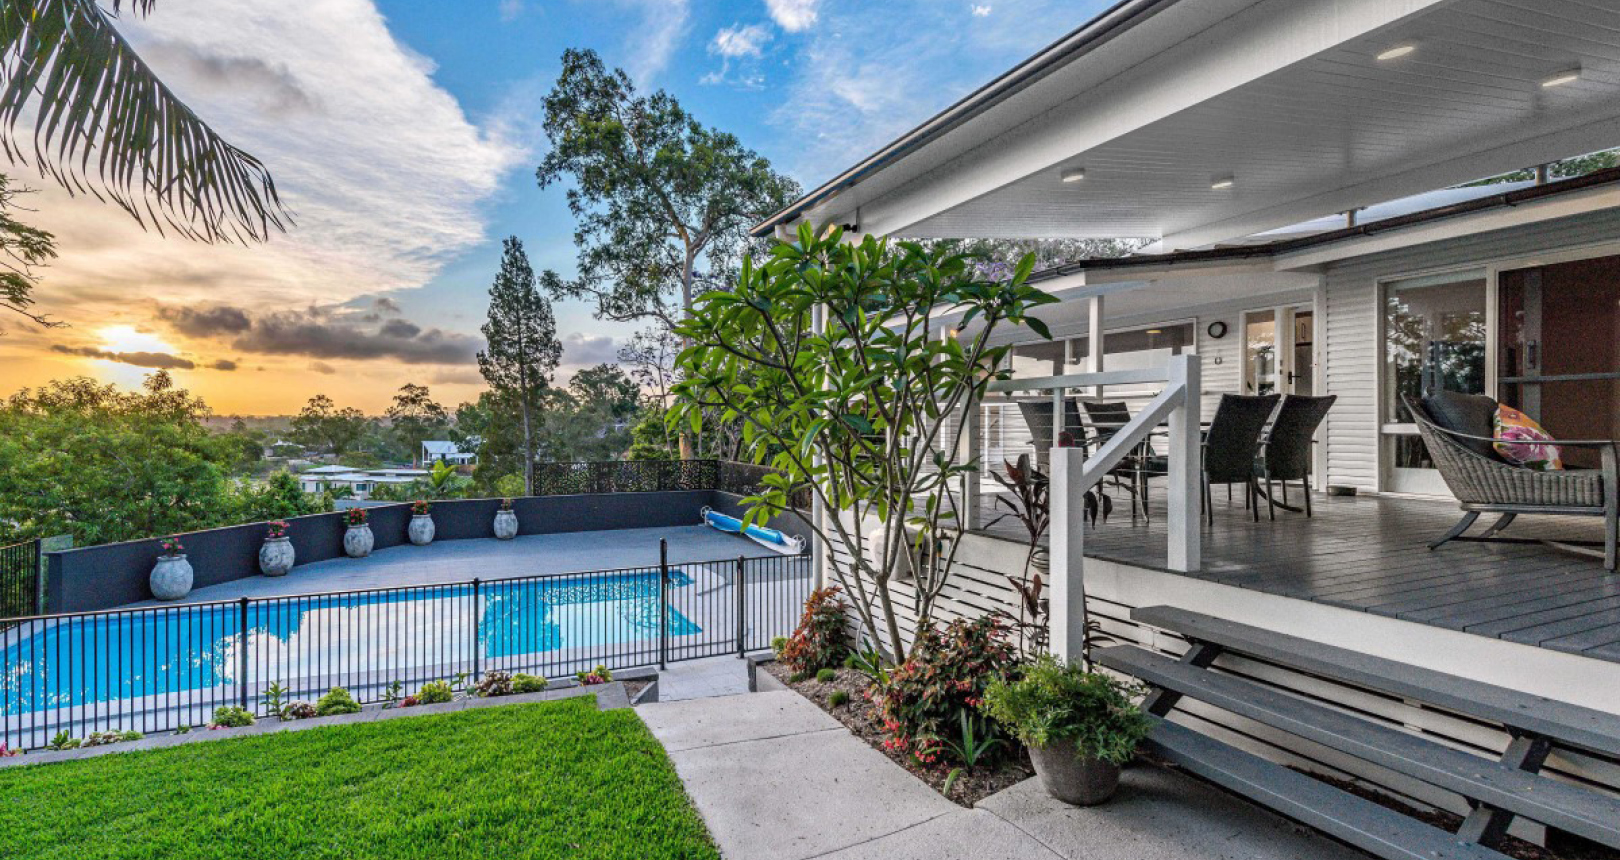 Real estate in Indooroopilly overlooking the Brisbane river